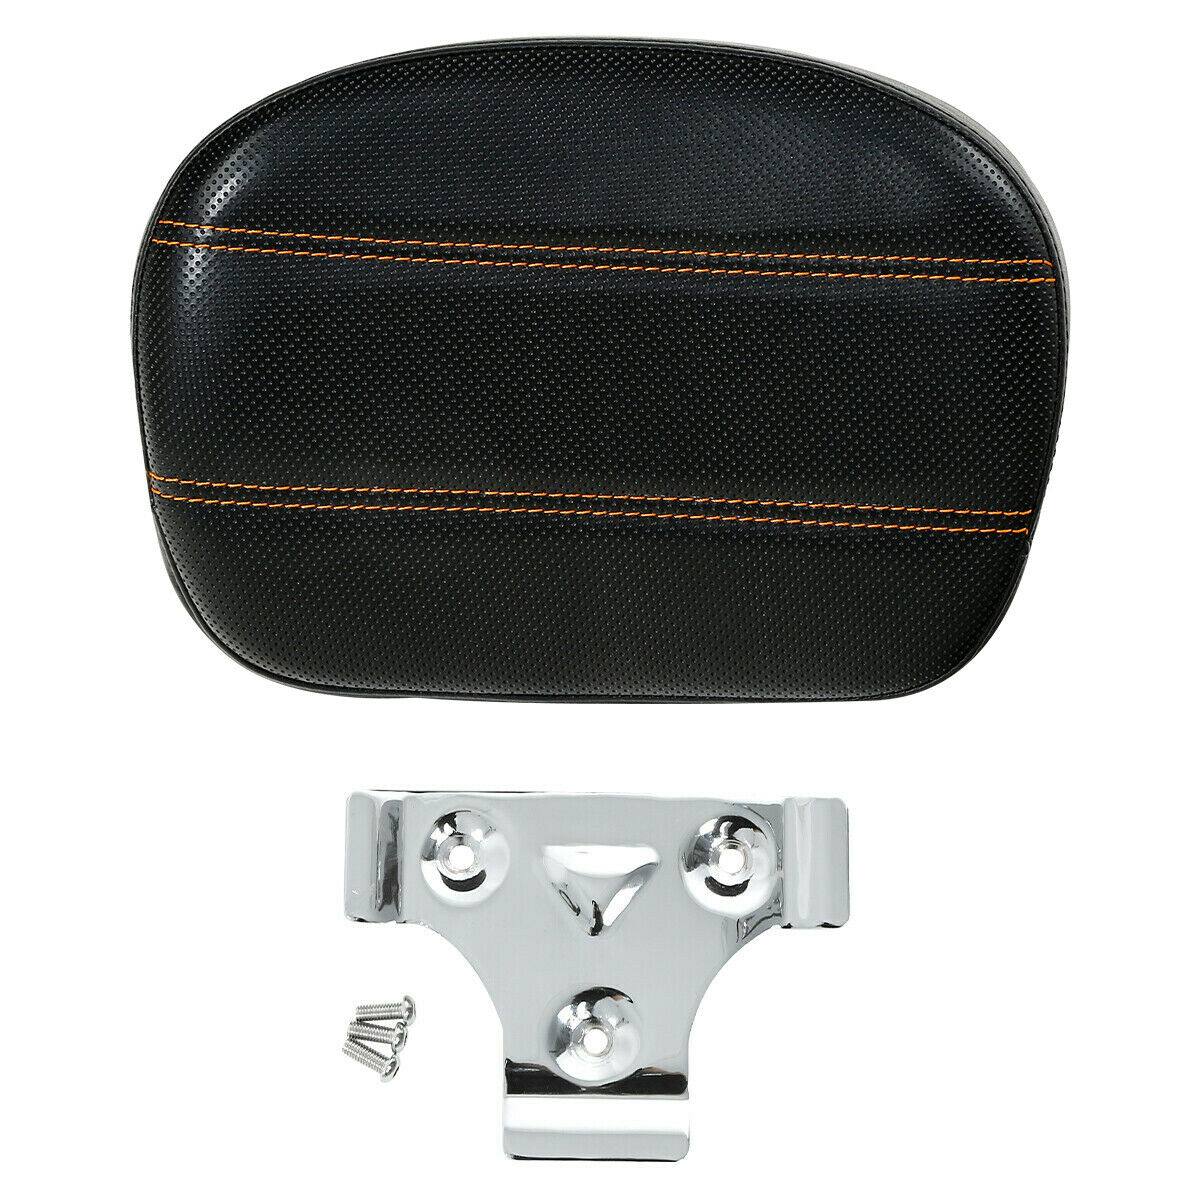 Rear Passenger Sissy Bar Backrest Pad Fit For Harley Touring Street Glide Black - Moto Life Products